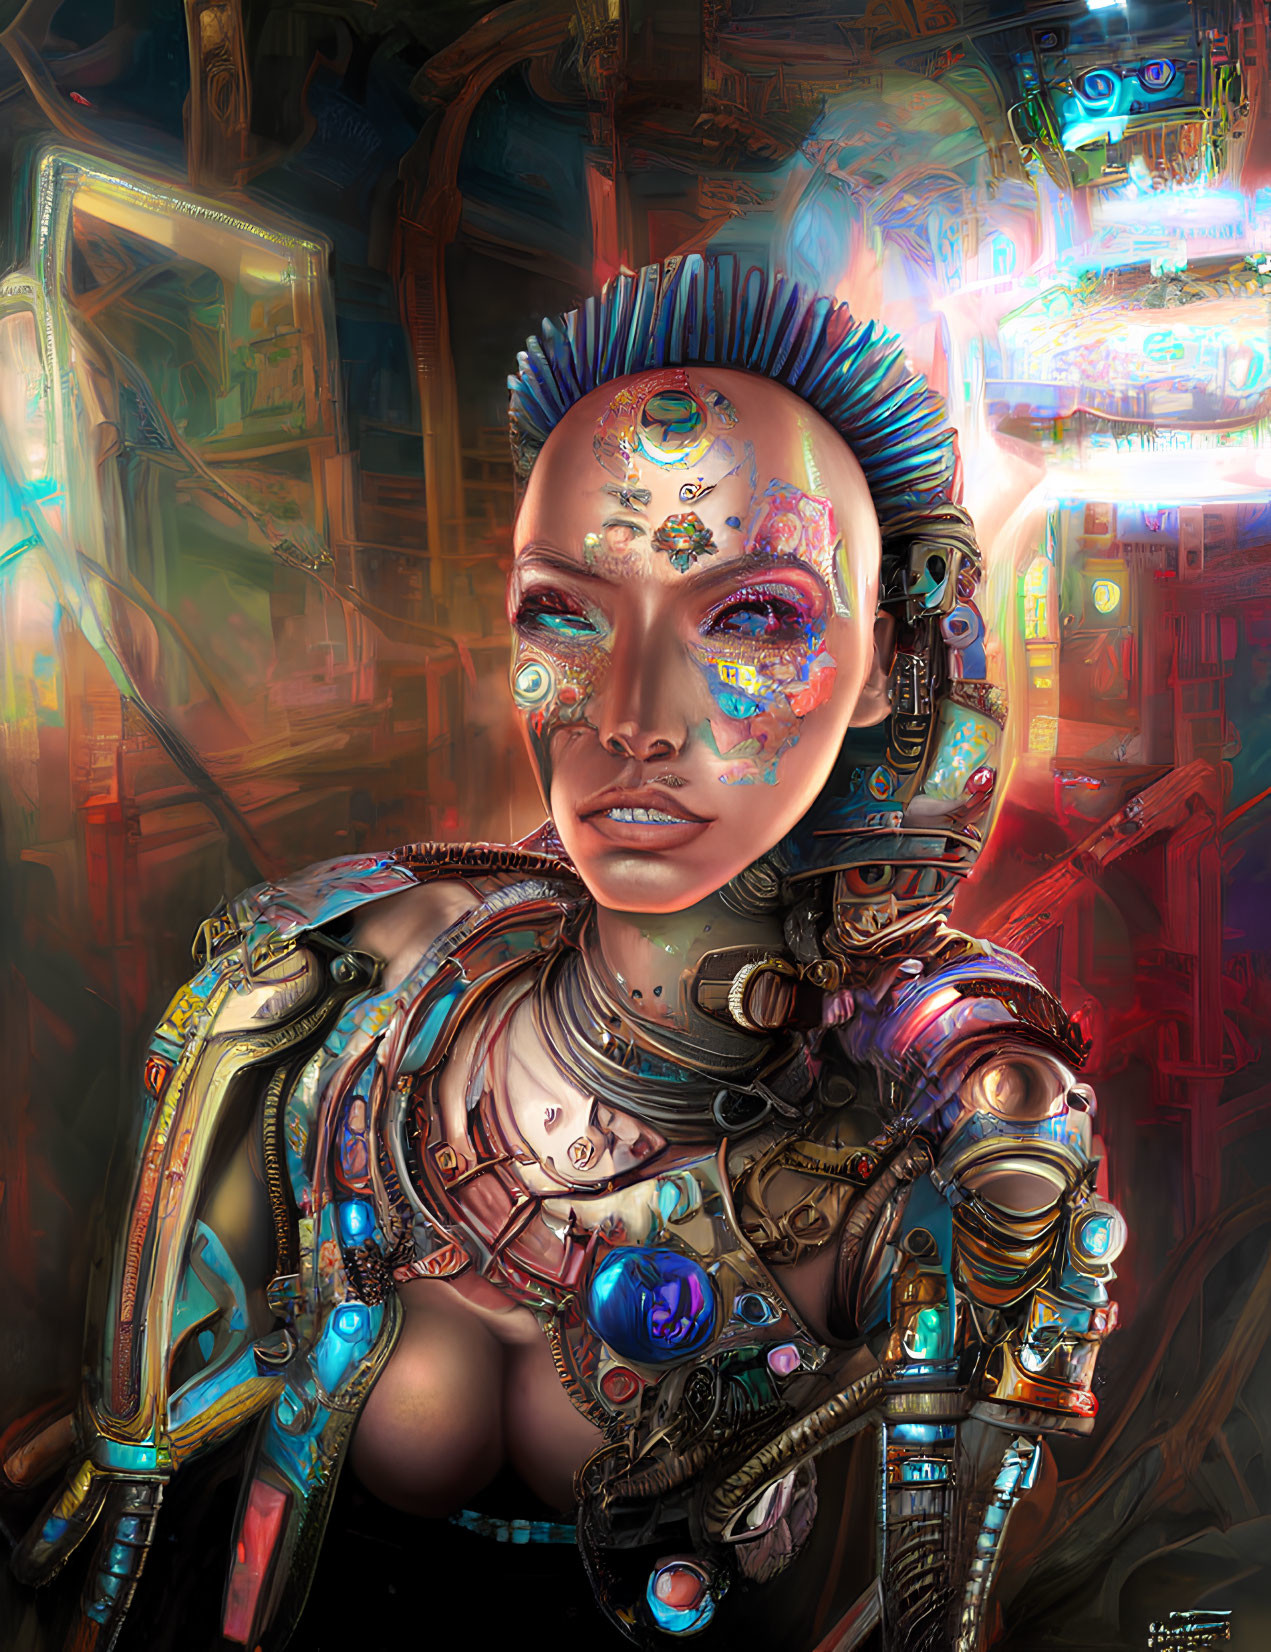 Futuristic female android with cybernetic enhancements